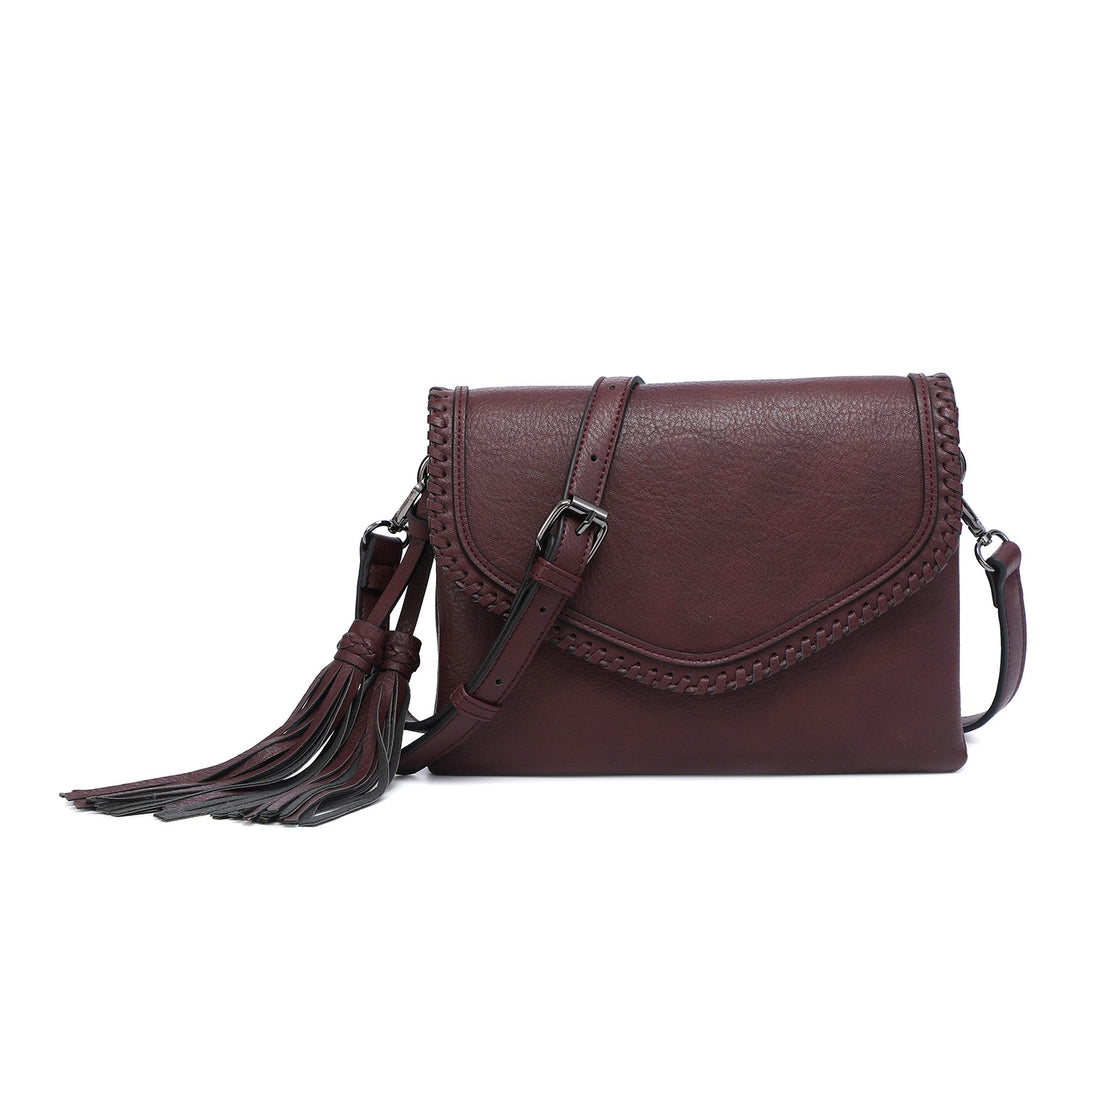 Load image into Gallery viewer, Sloane Flapover Crossbody w/ Whipstitch (All Colors)
